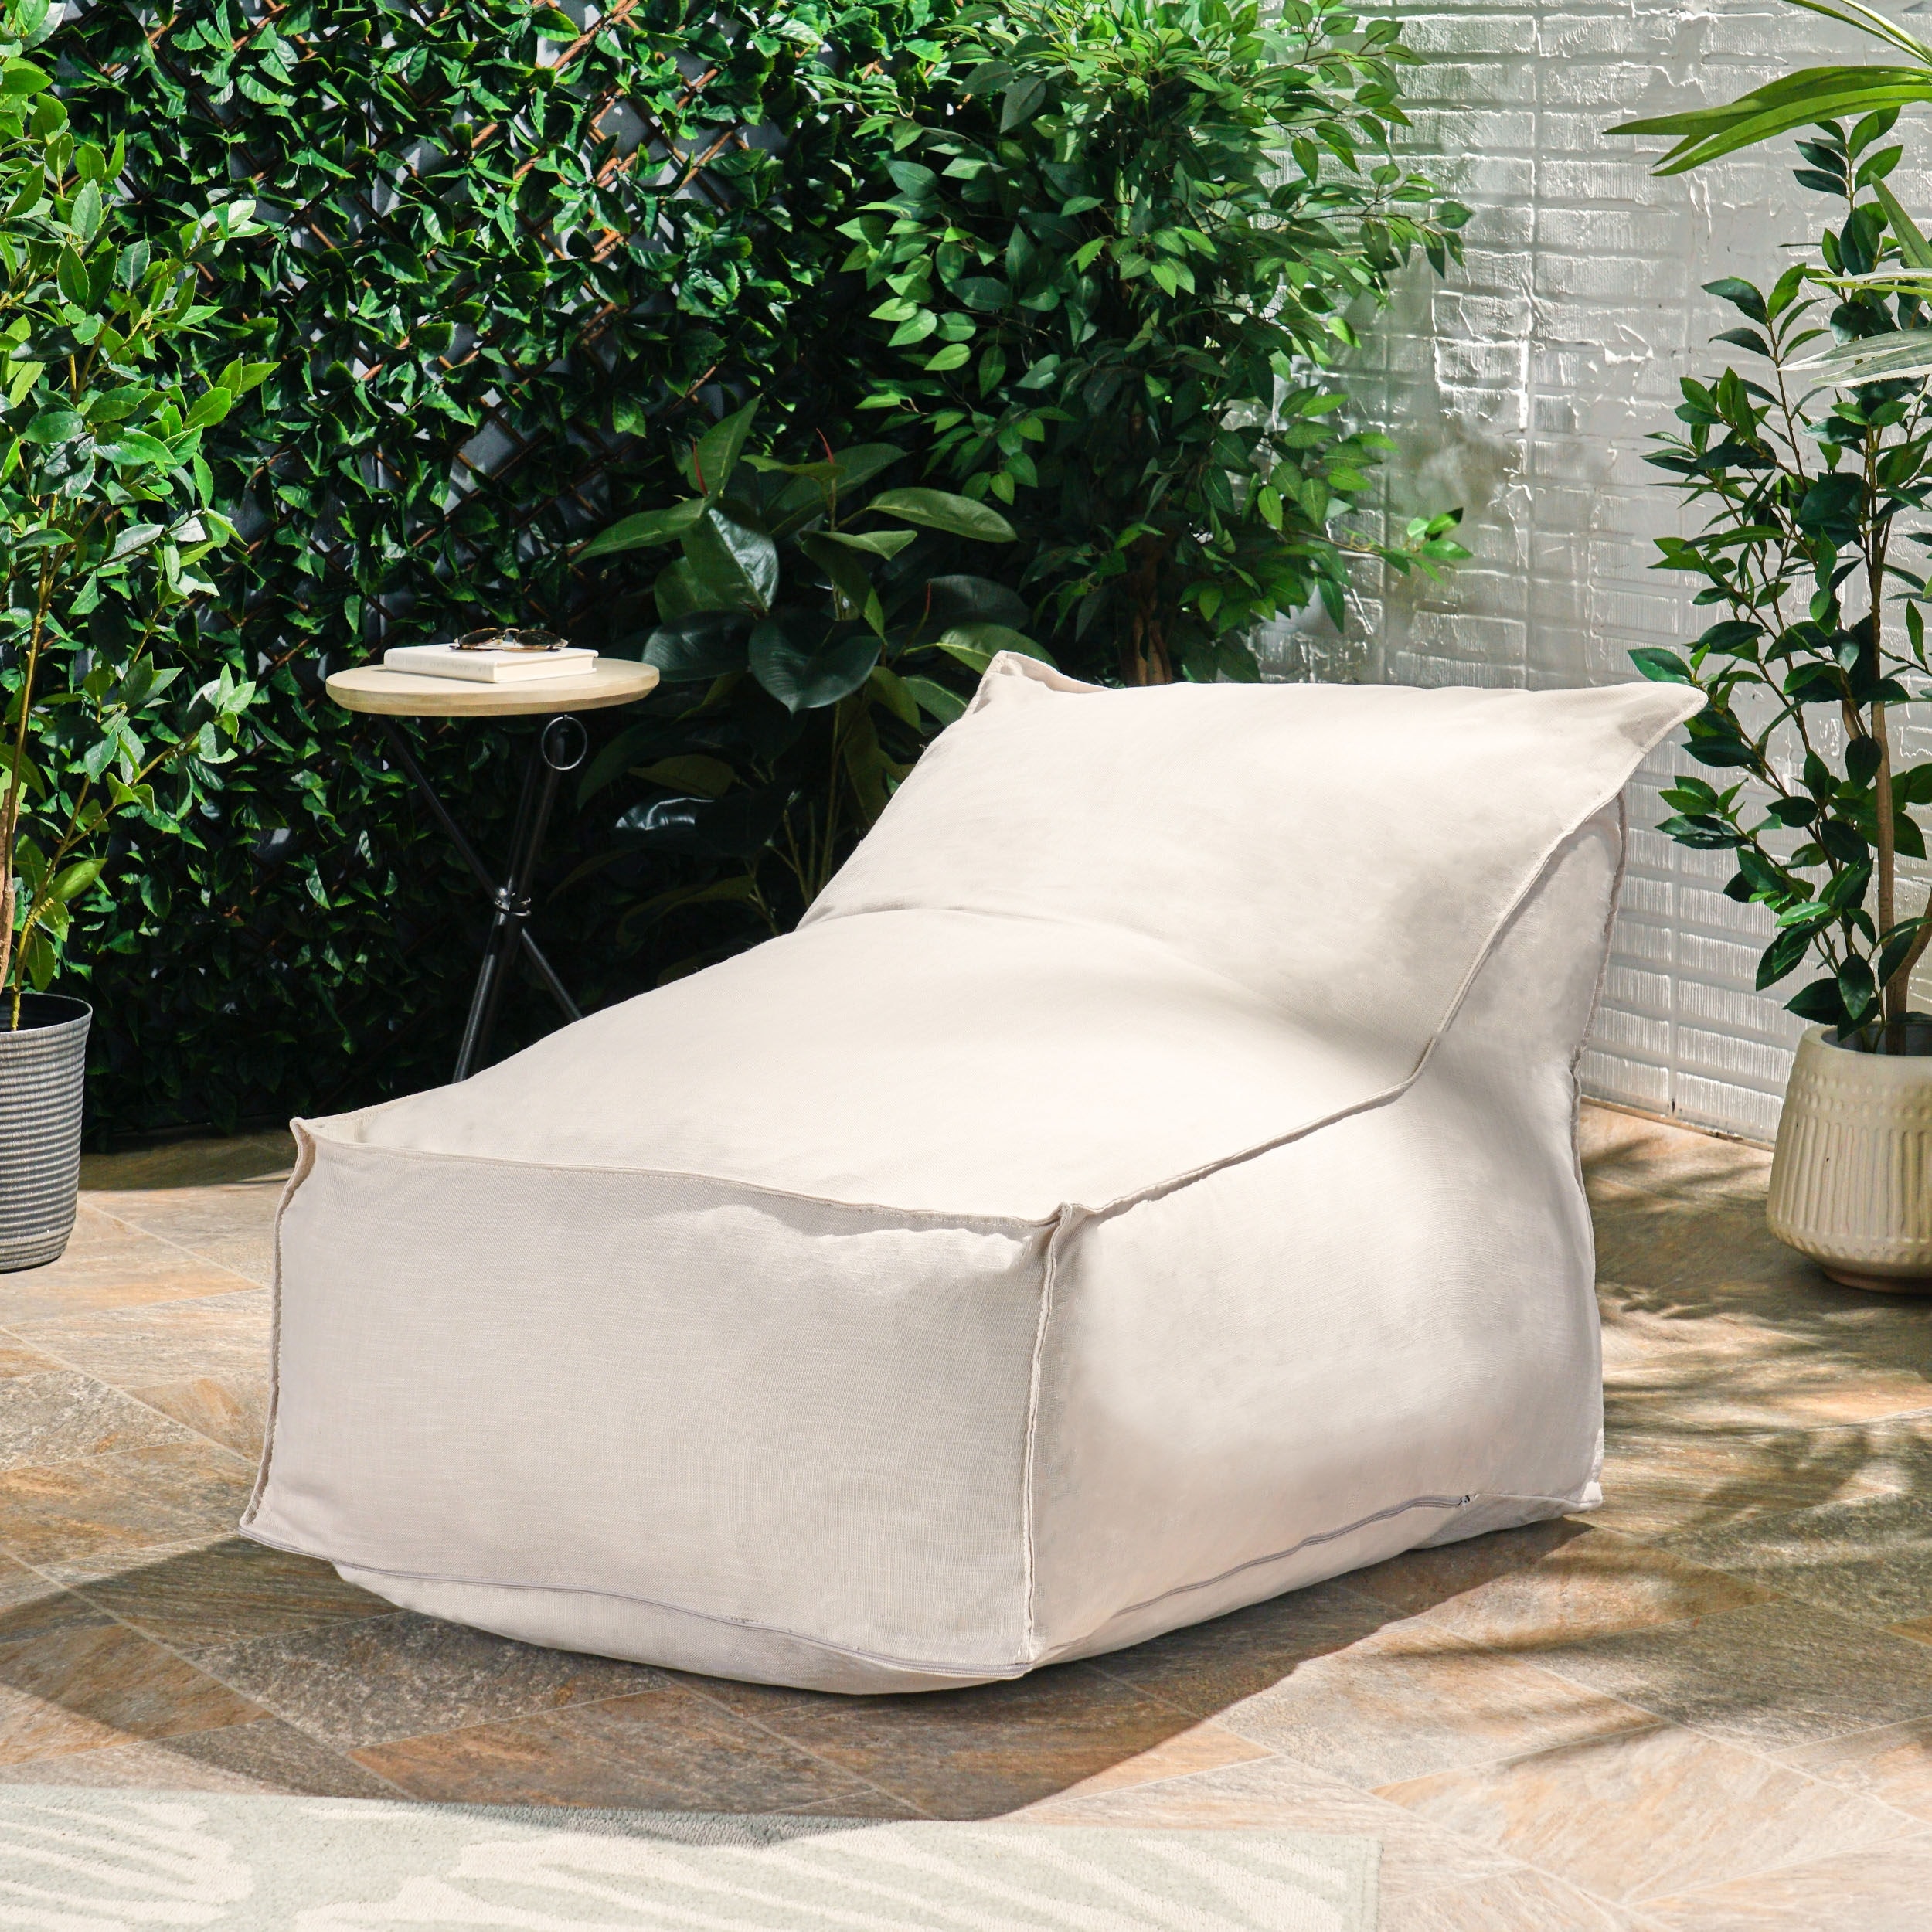 Tulum Indoor/outdoor Bean Bag Lounger By Christopher Knight Home